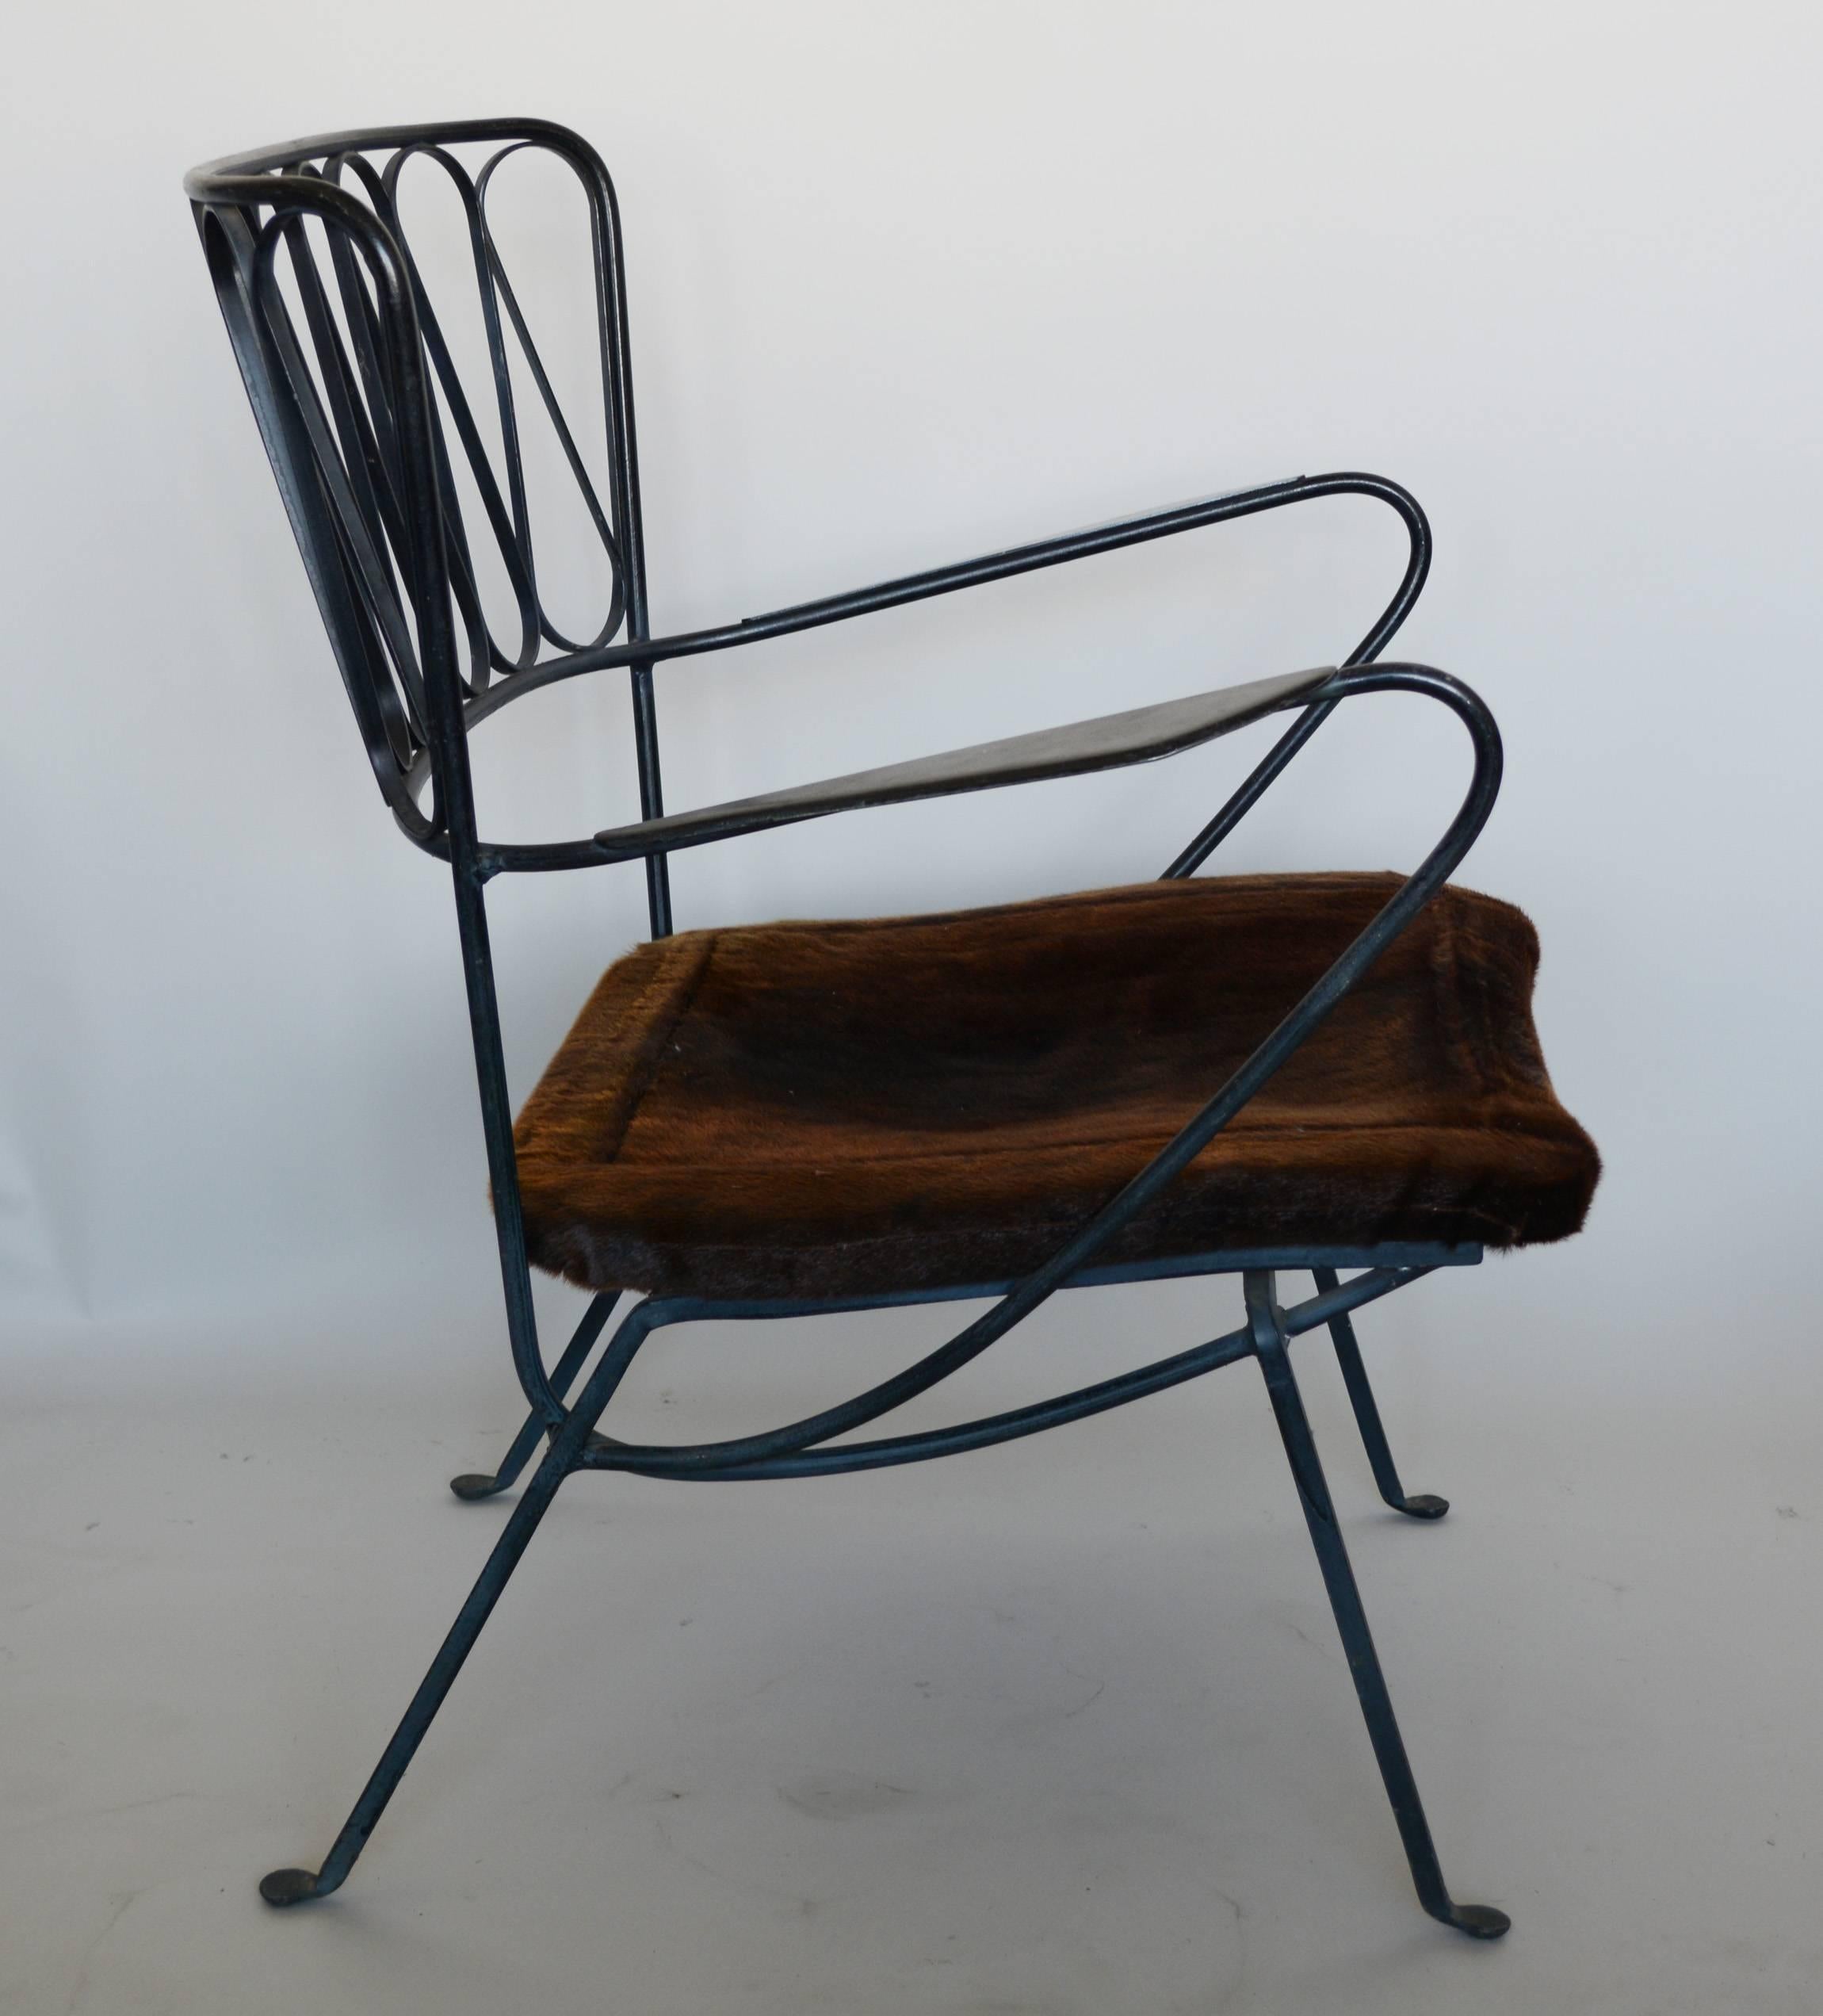 Ribbon back lounge chair with ottoman designed by Maurizio Tempestini.
The seat and ottoman top have an open wood frame with a leather sling attached. The leather was covered with mink at some point. The iron frame is original, there is some wear